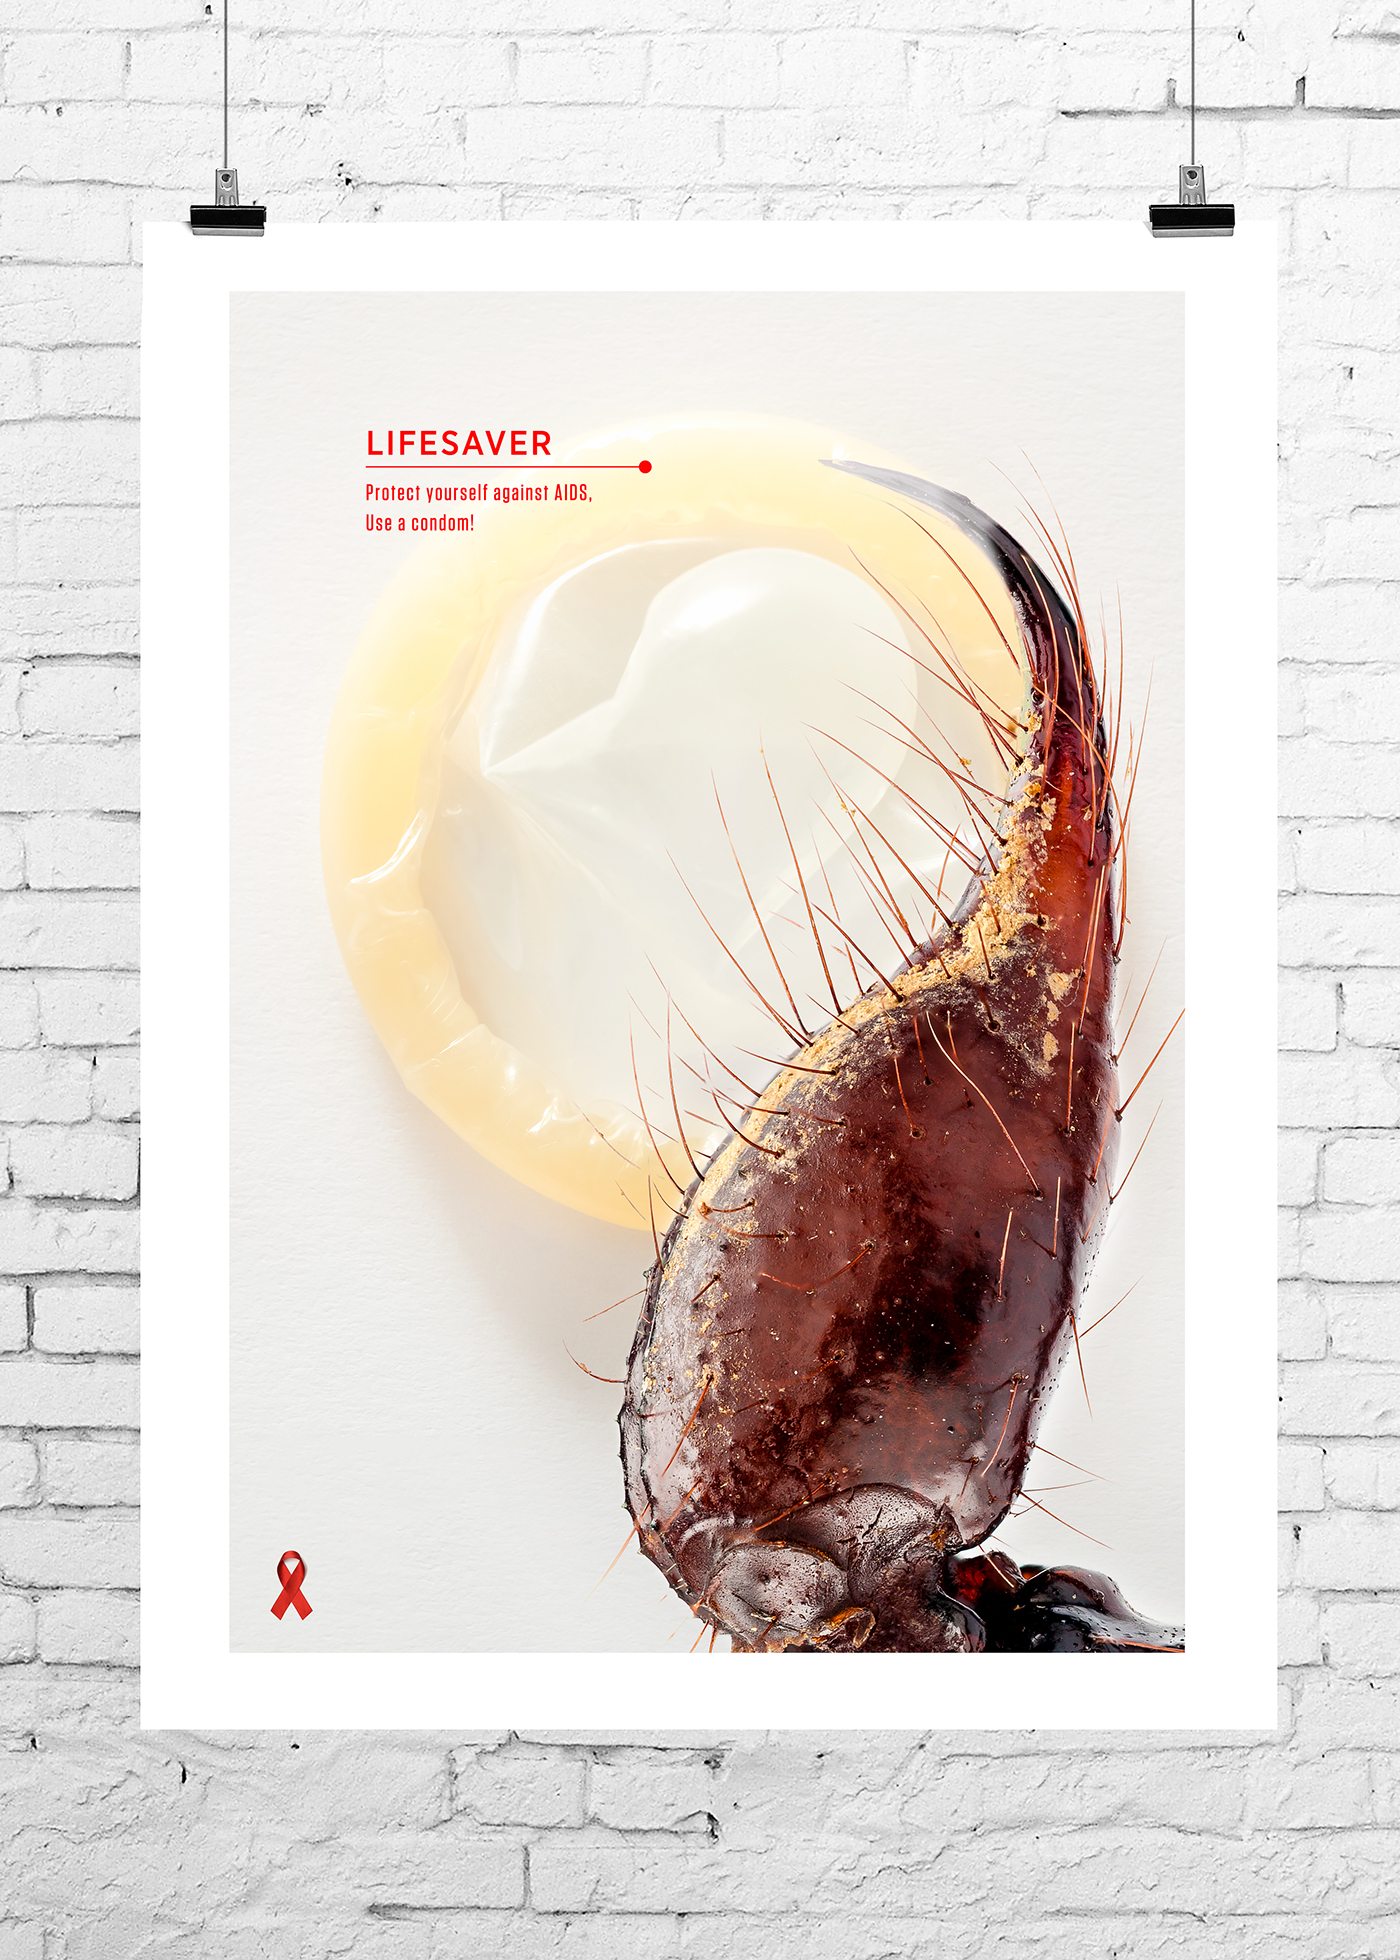 poster AIDS promotional material scorpion CONDOM blood red